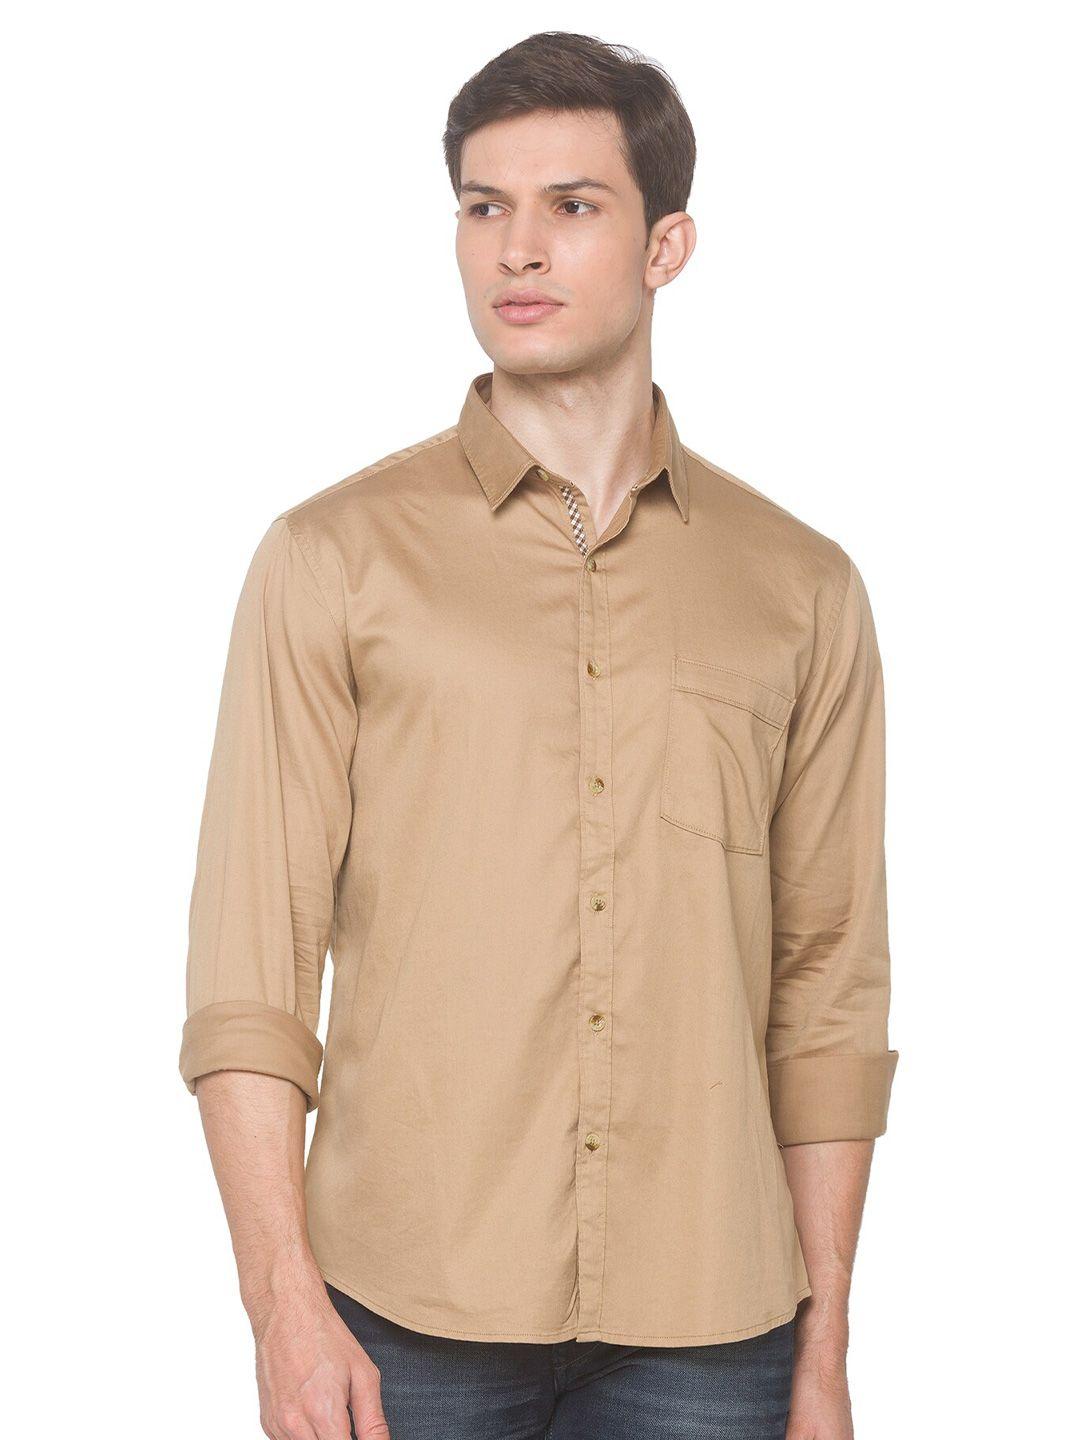 snx classic tailored fit pure cotton casual shirt